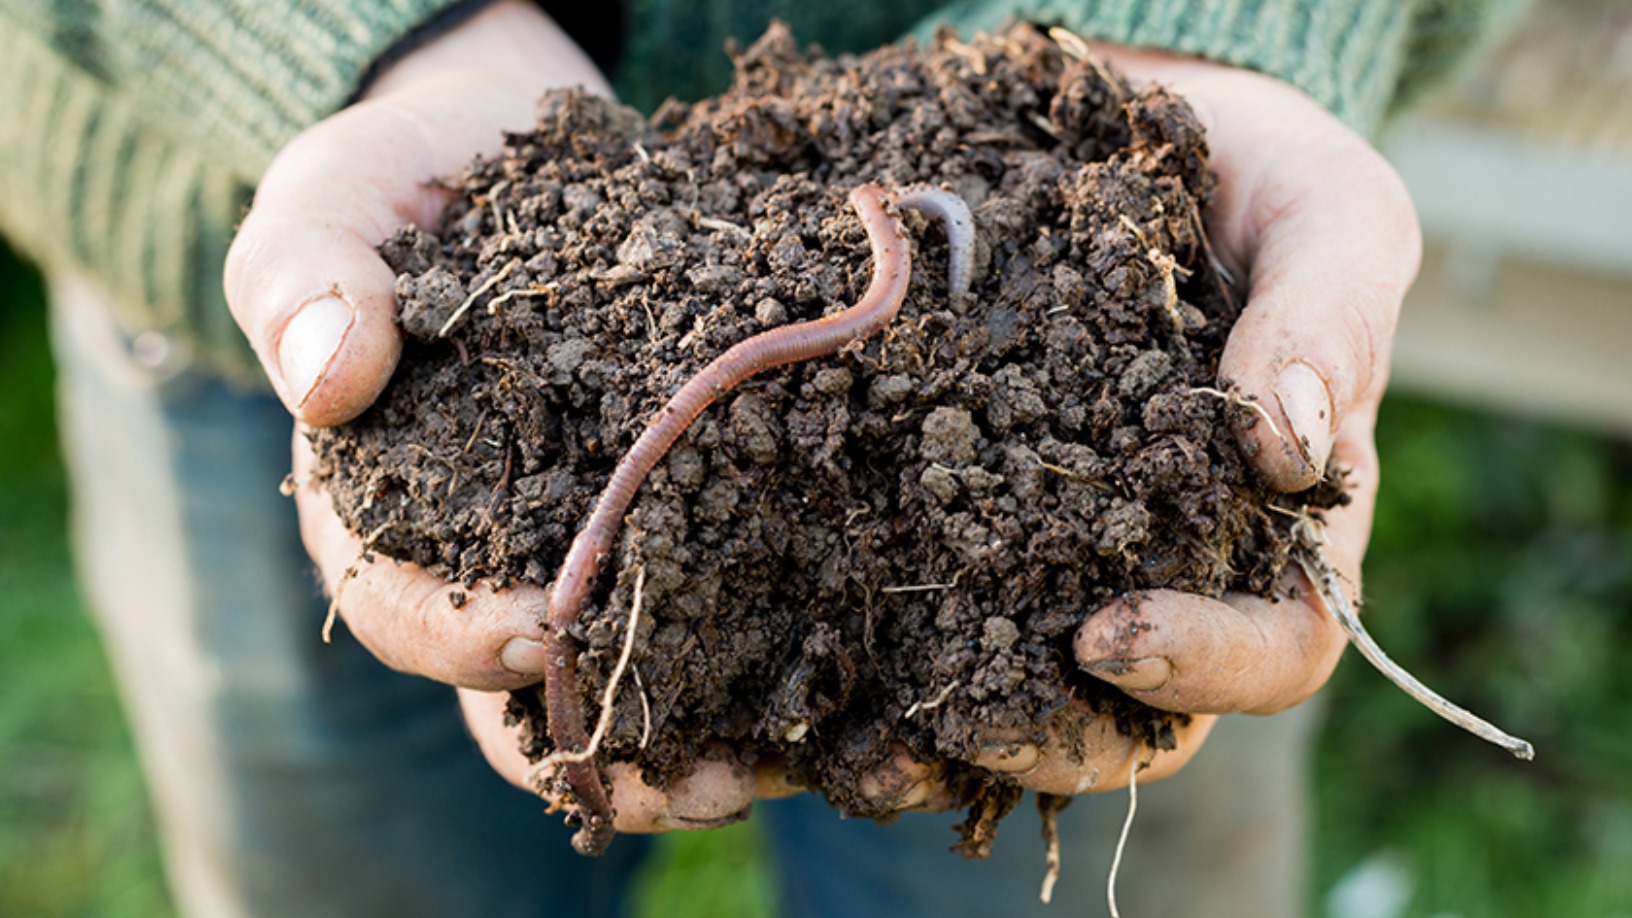 Xing Nong Fu: Using earthworms to create sustainable local farming and livelihoods